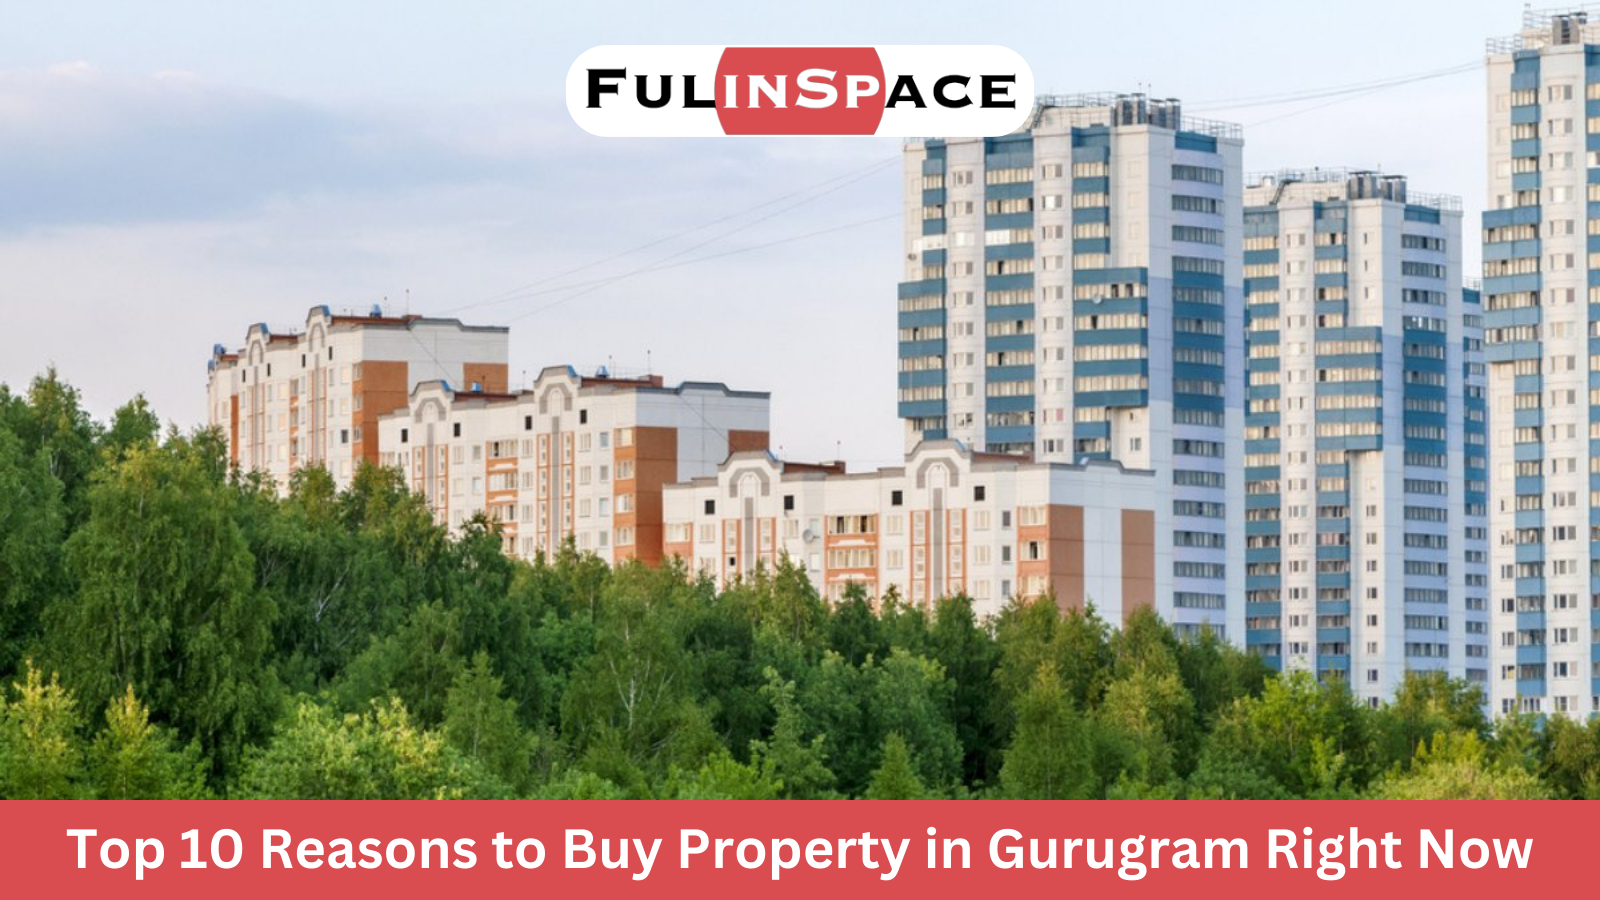 Top 10 Reasons to Buy Property in Gurugram Right Now